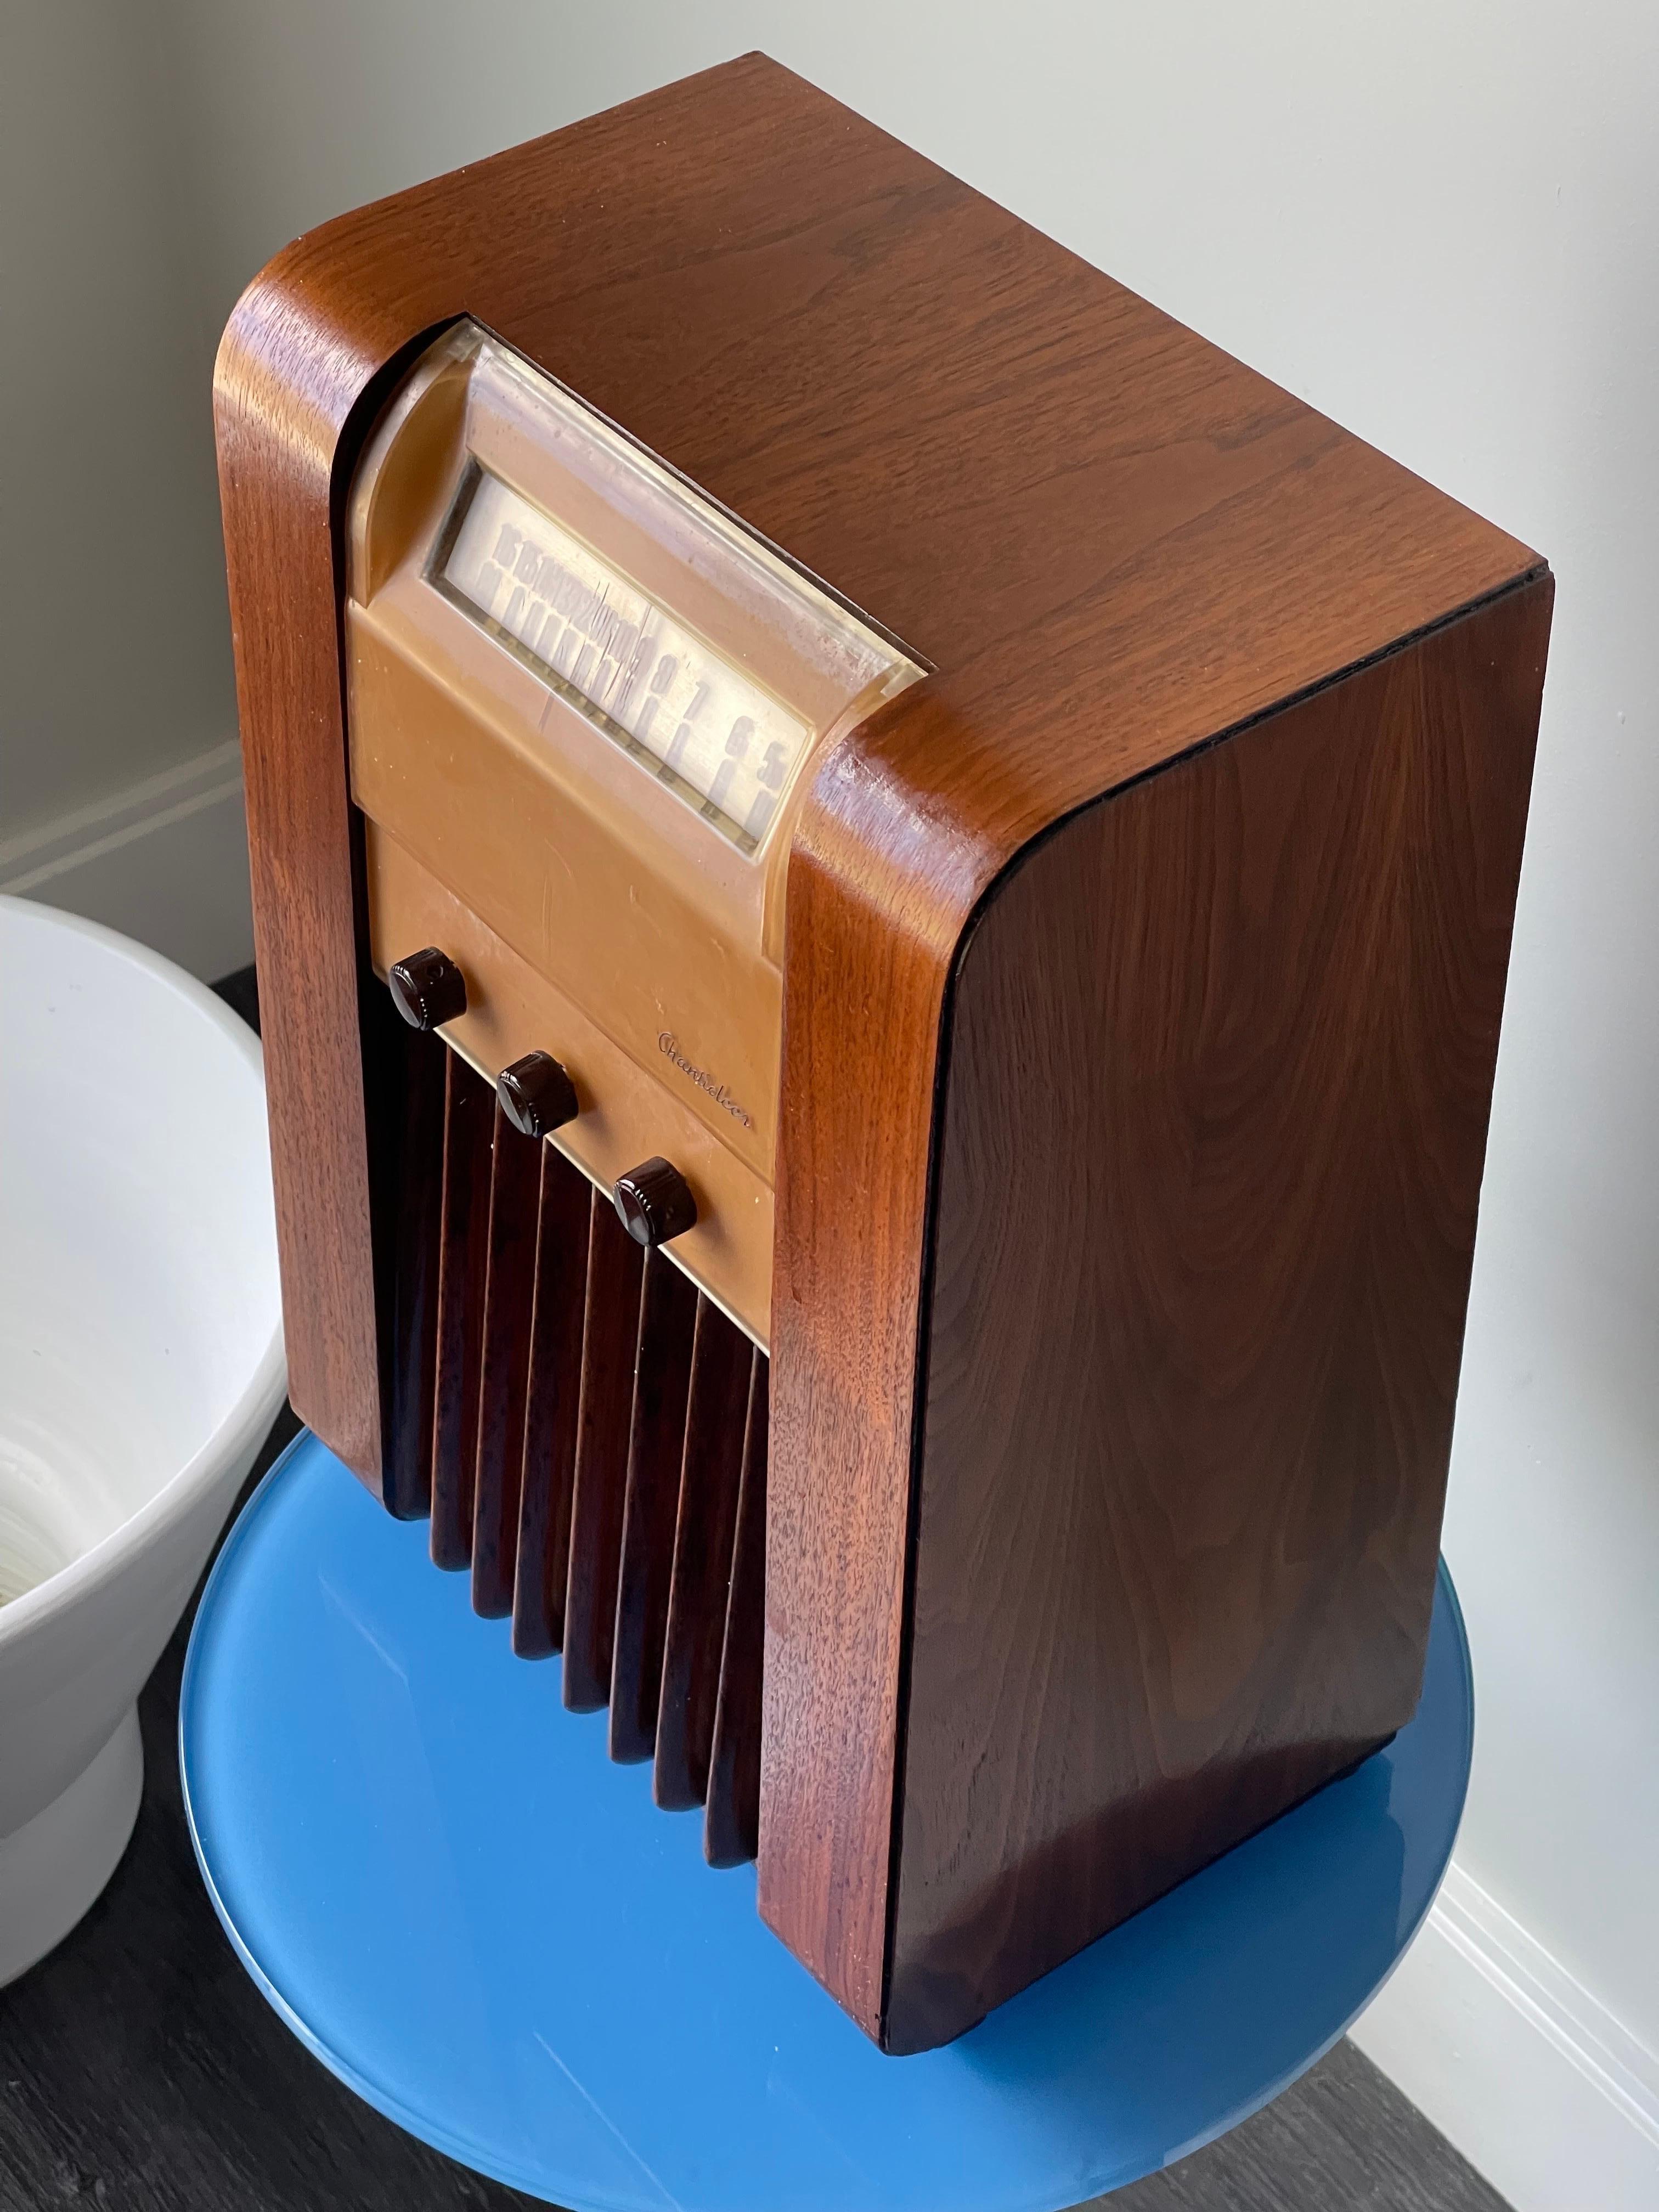 American Mid-Century Modern Vintage Antique Cathedral Radio by Detrola Alexander Girard For Sale